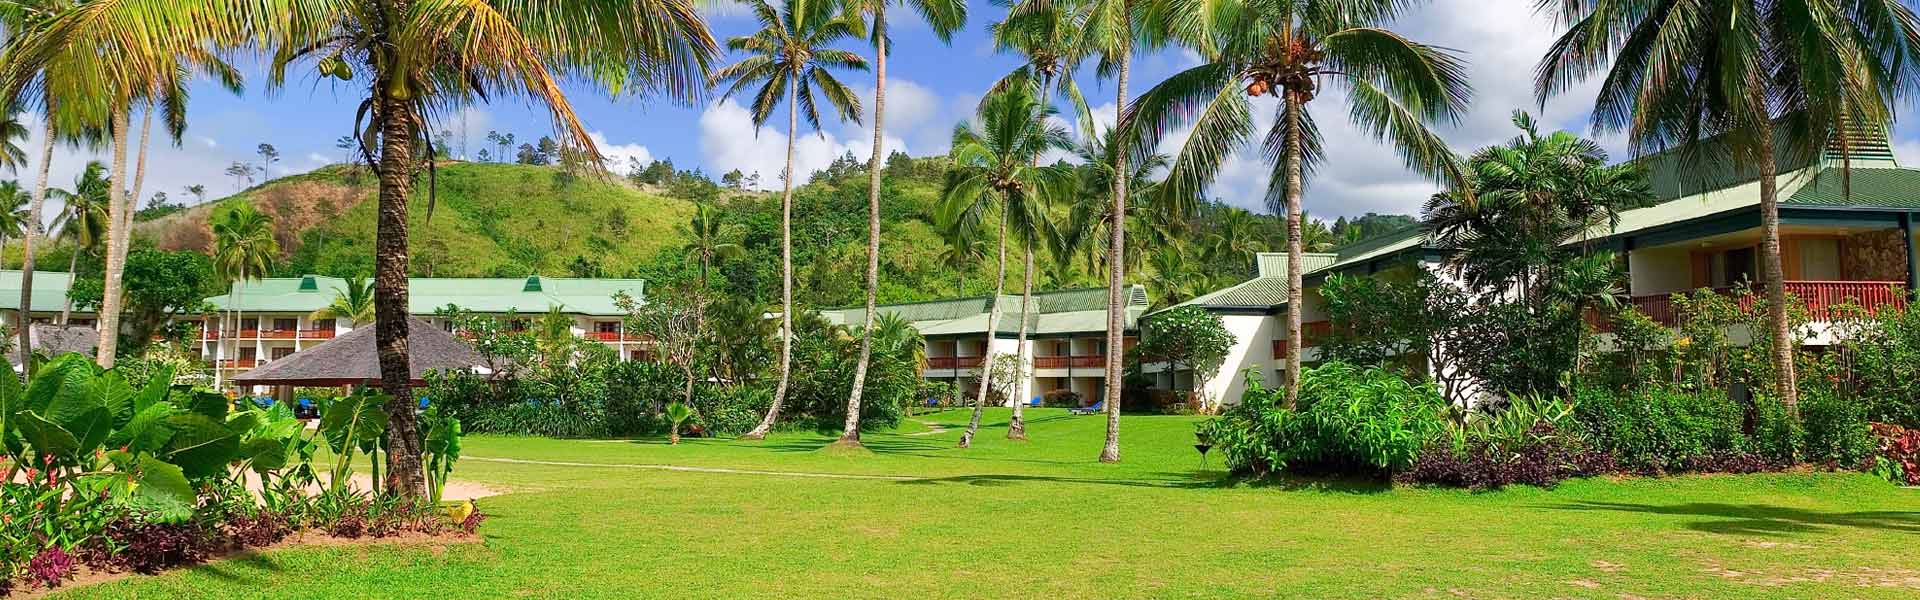 Celebrate New Year’s Eve with Family in Fiji